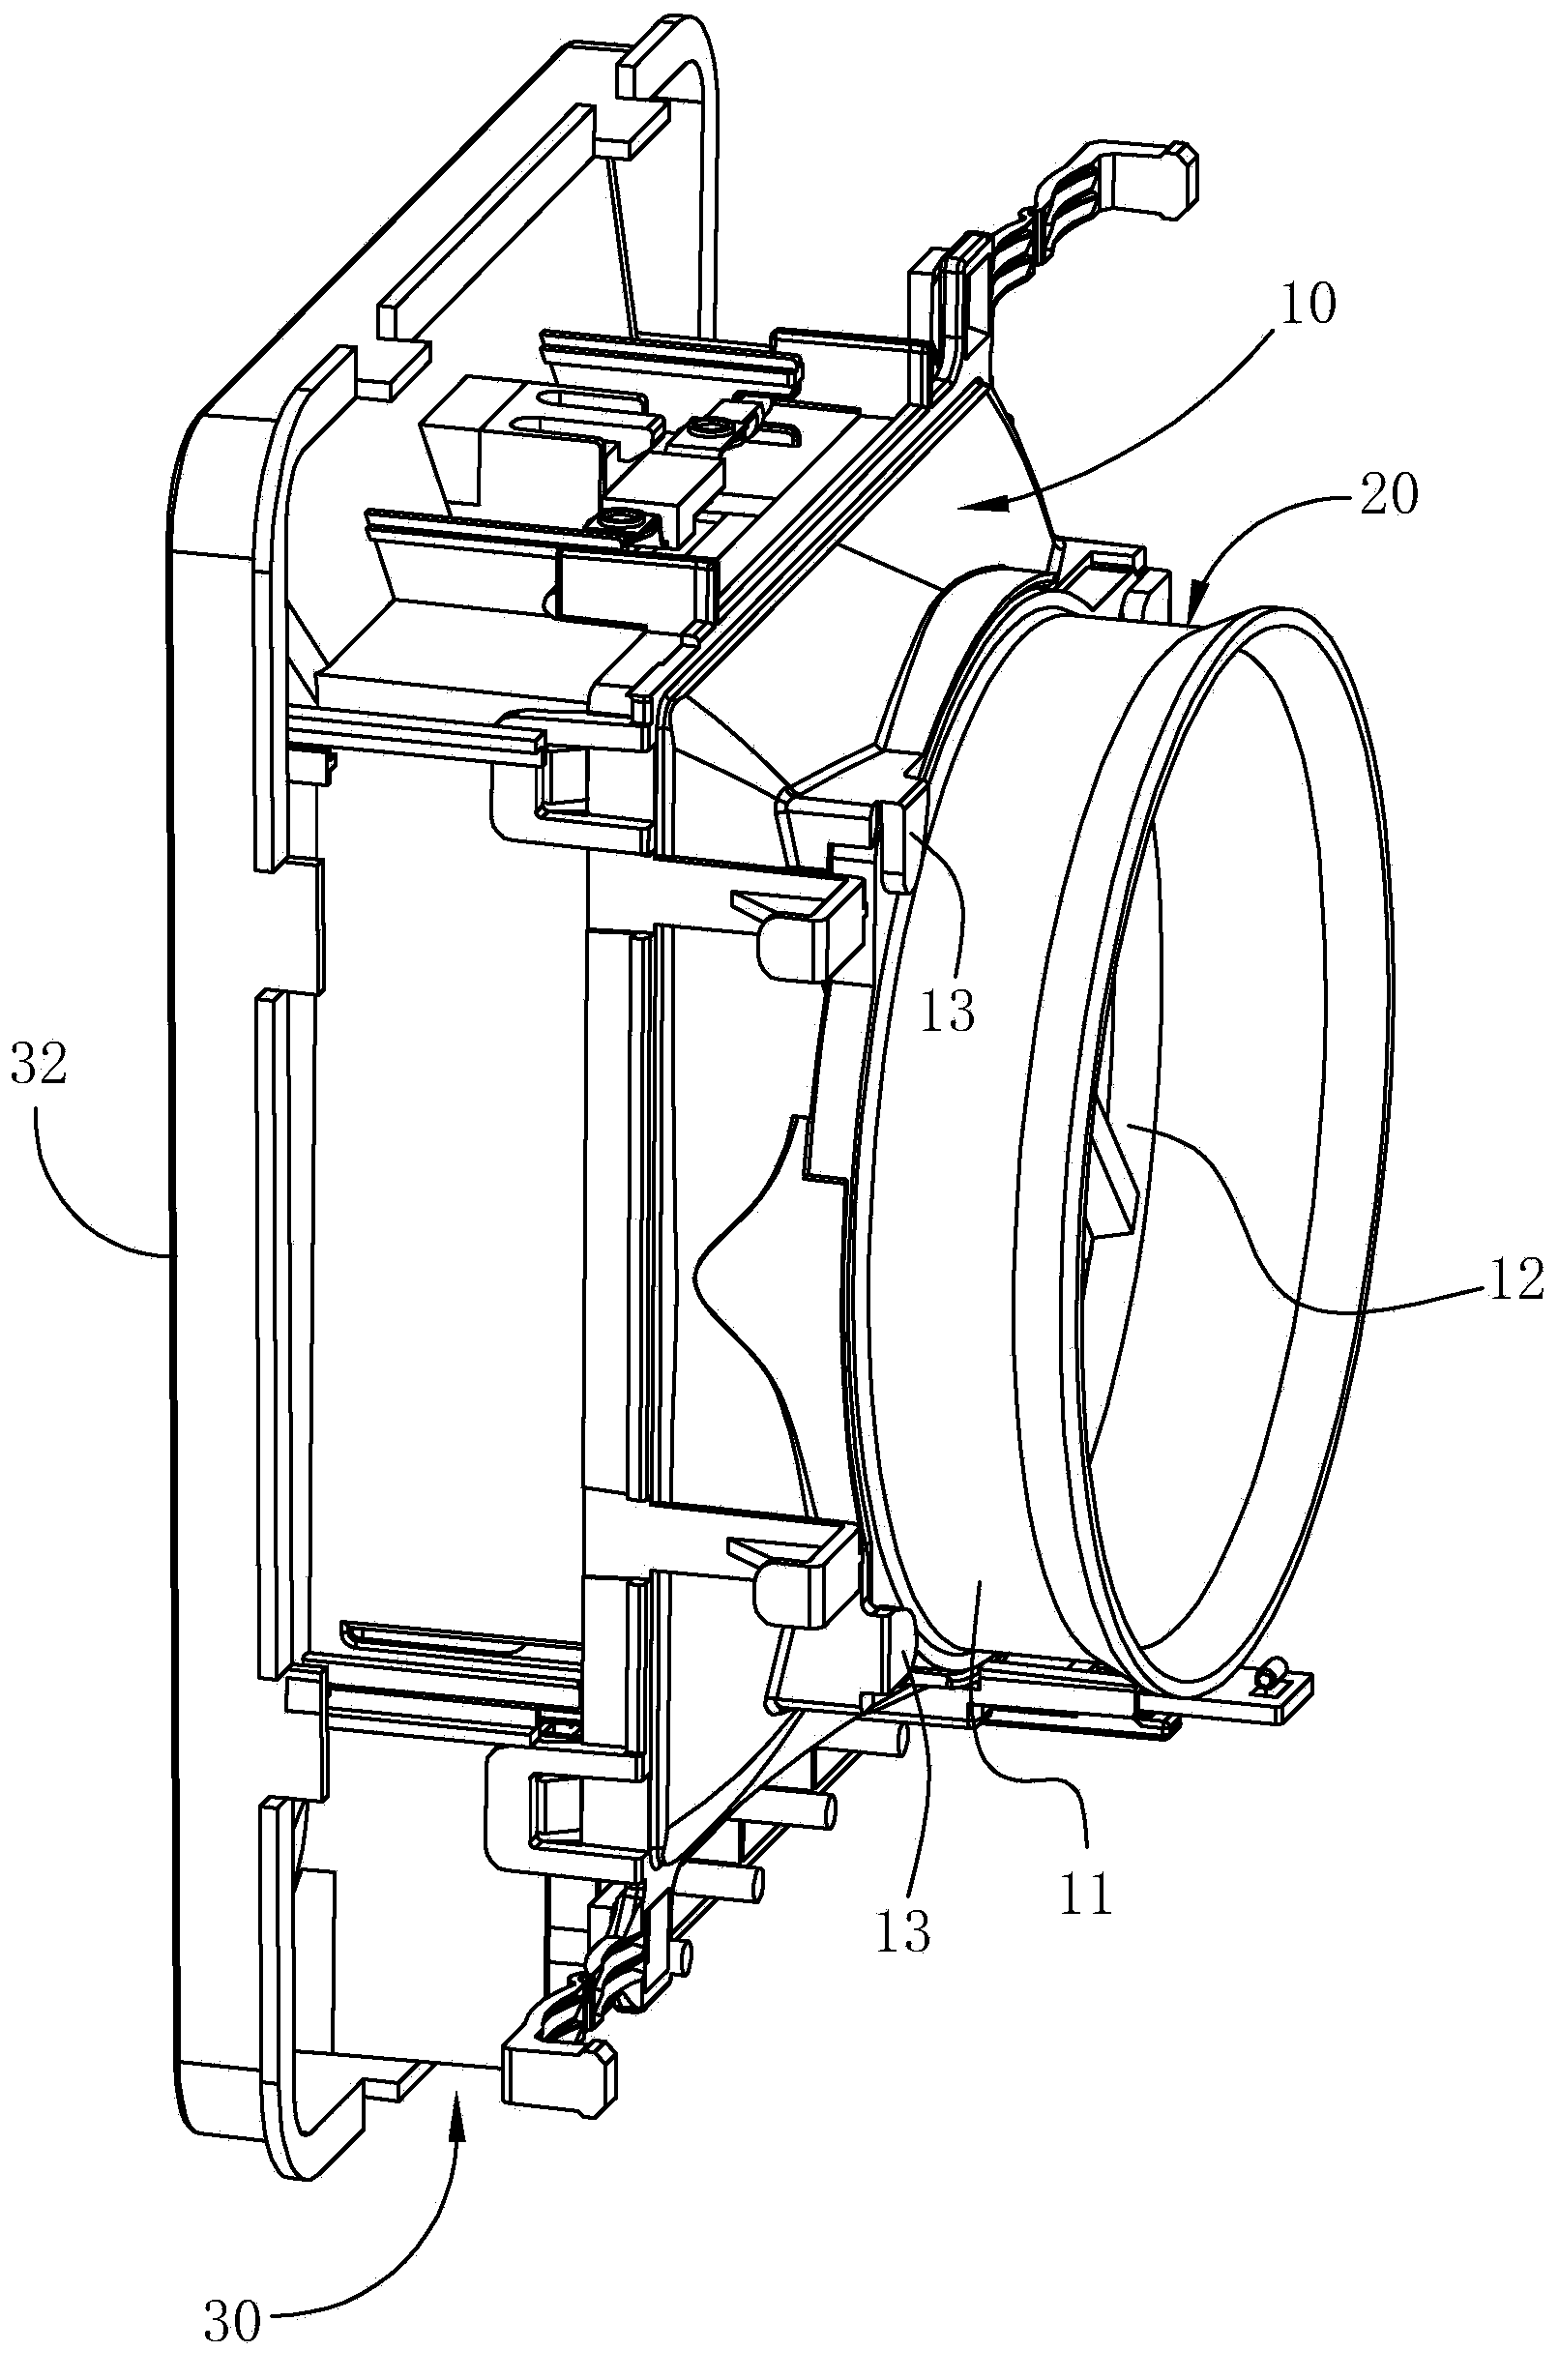 Warm air blower core assembly having variable power